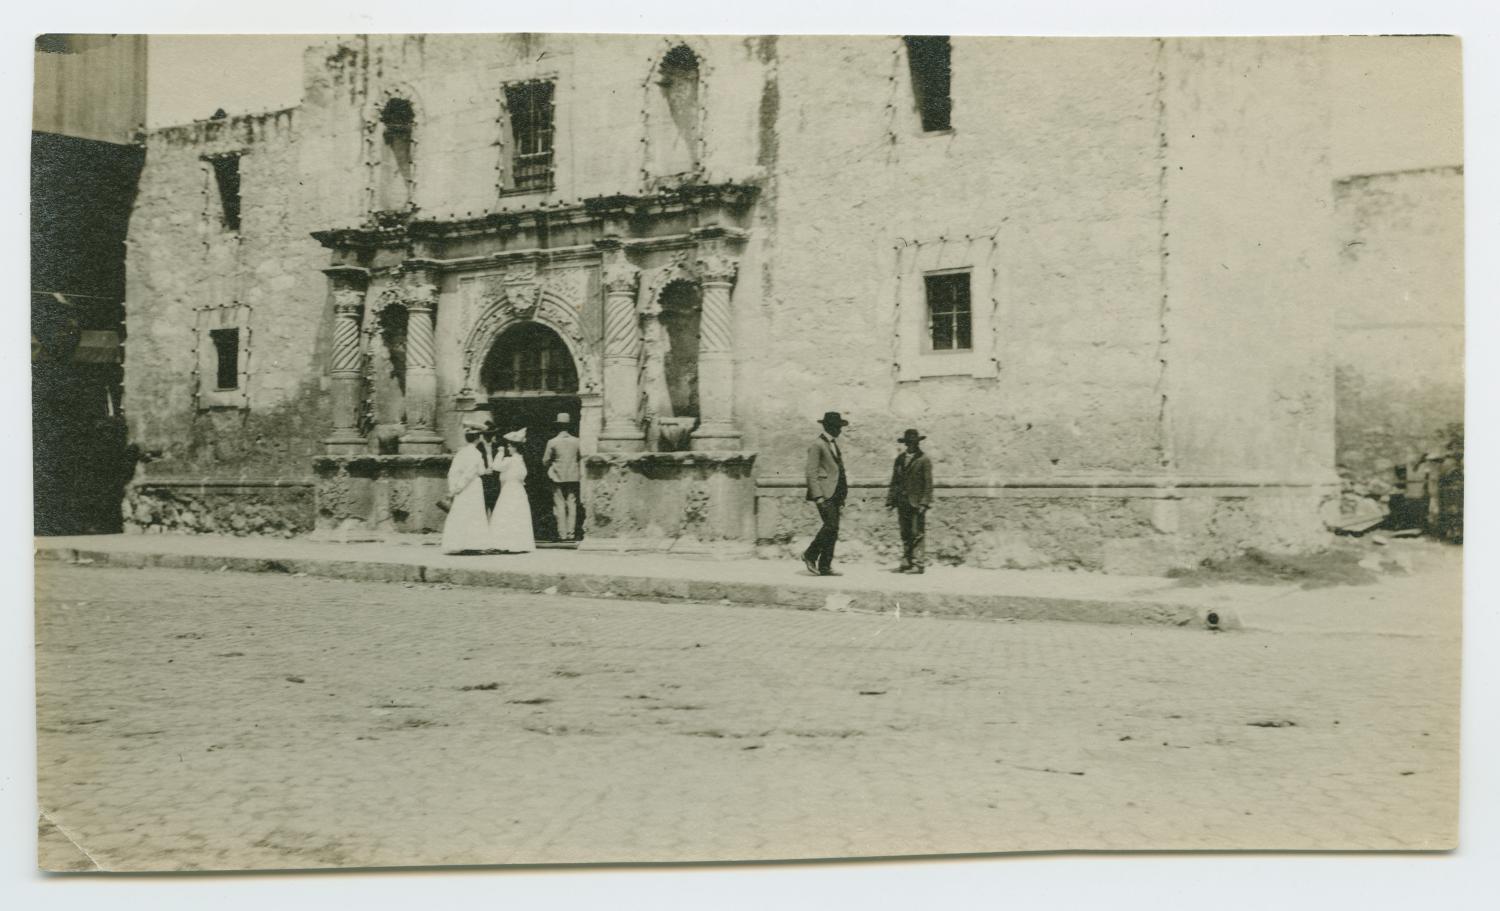 [People Visiting the Alamo], Photograph of a group of people in front of the Alamo between 1900-1930. There appear to be three men and two women outside of the building., 